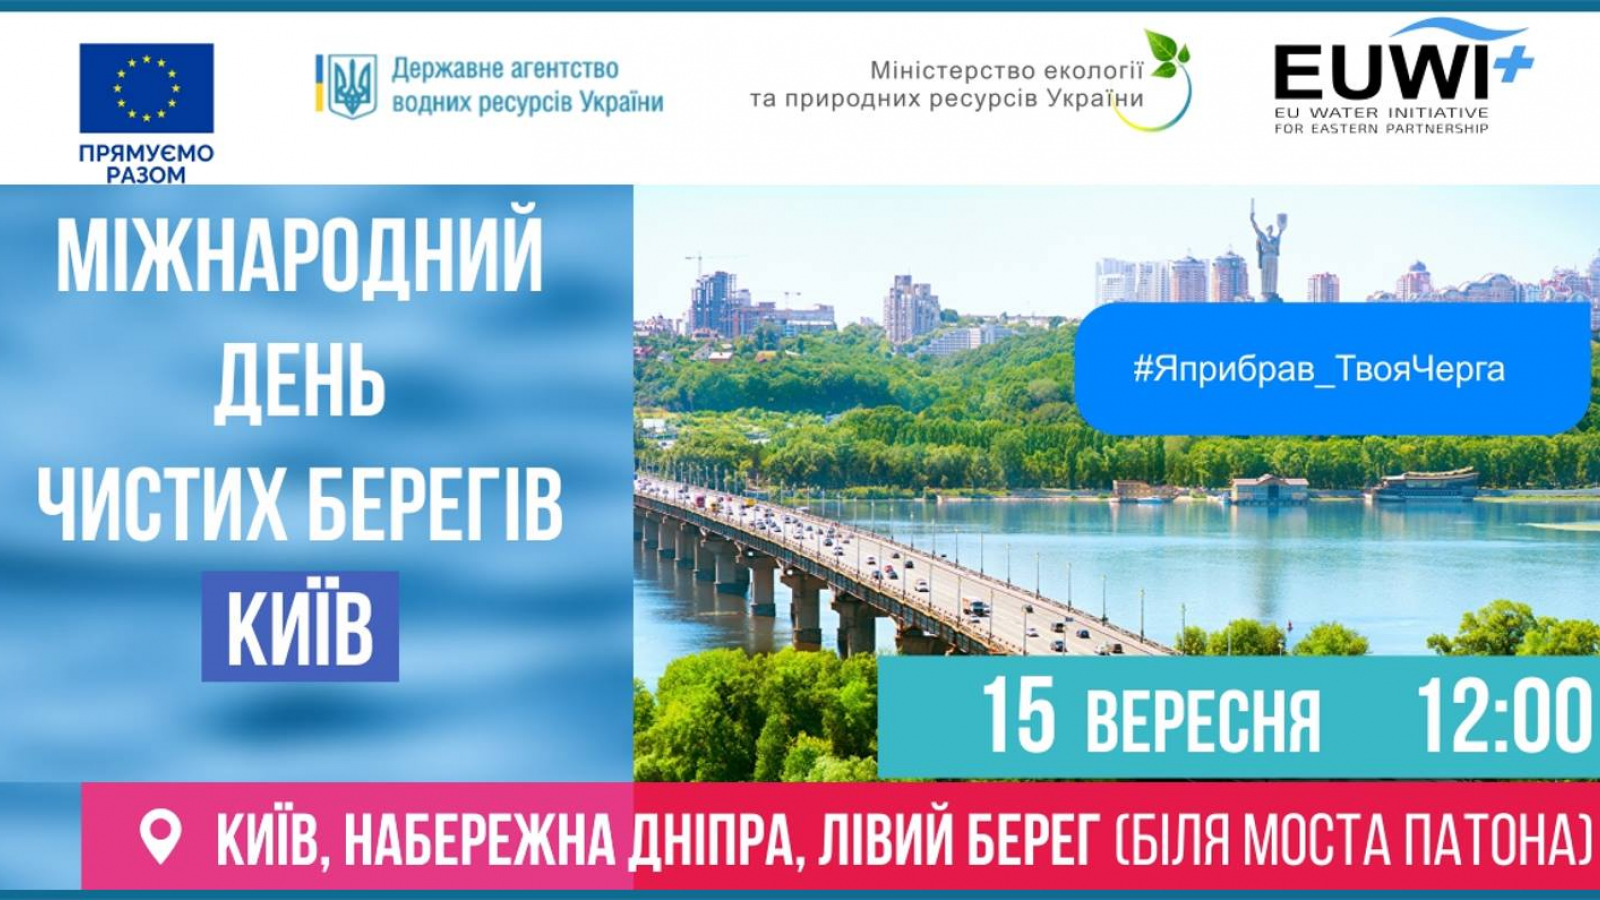 Ukraine joins in International Clean Beach Day with clean-up event in Kyiv